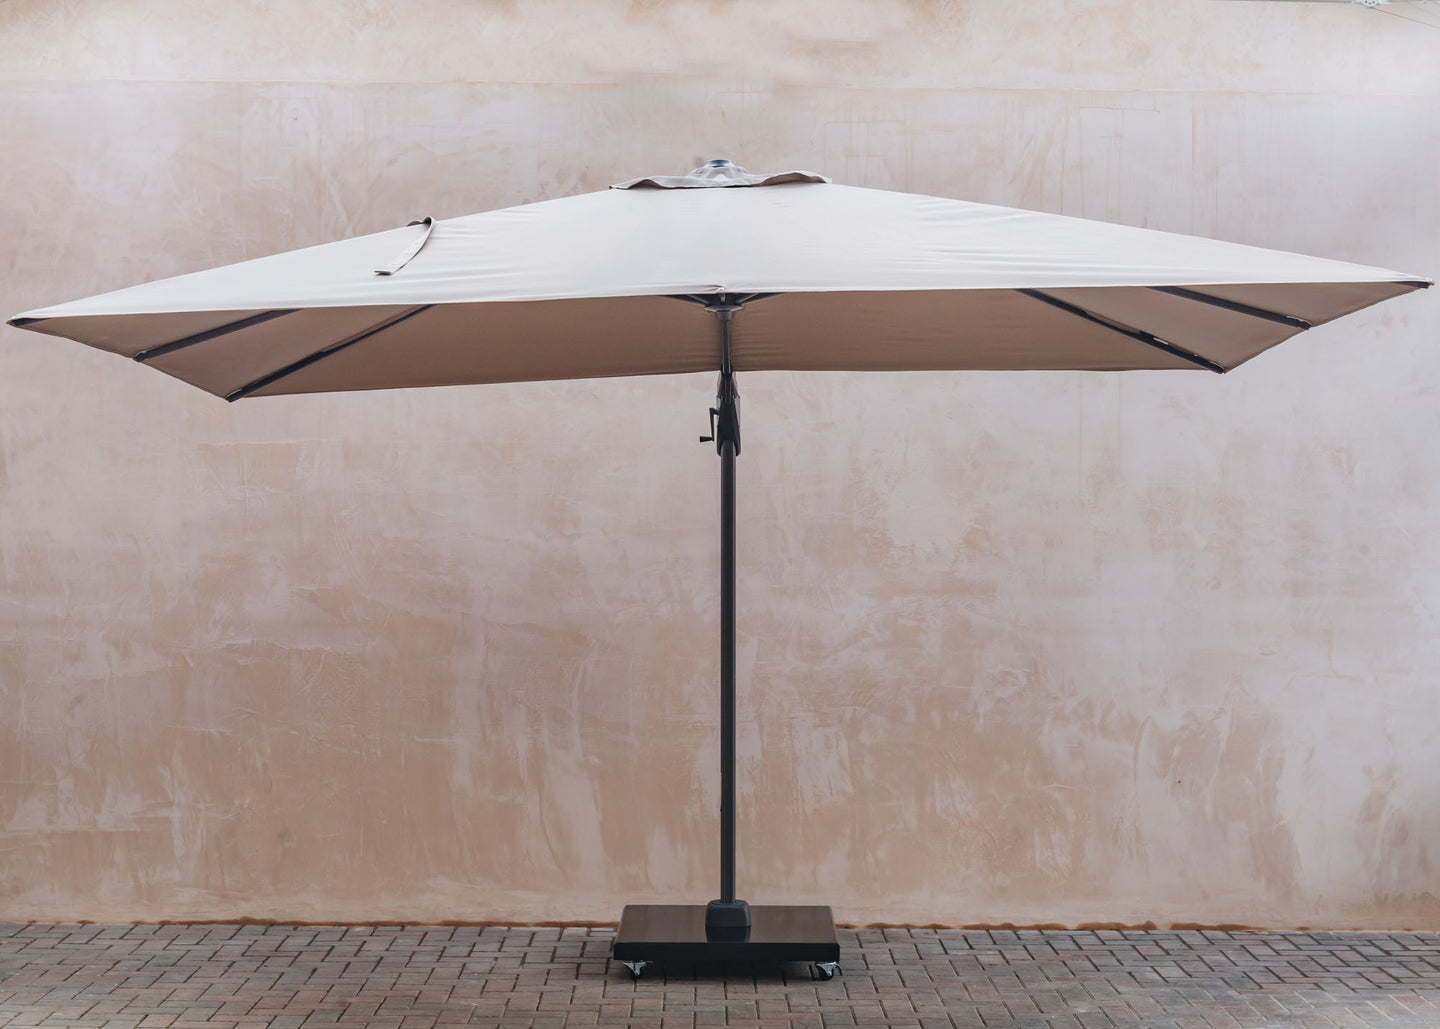 T2 Challenger Oblong Free Arm Parasol in Taupe (3.5mx2.6m)